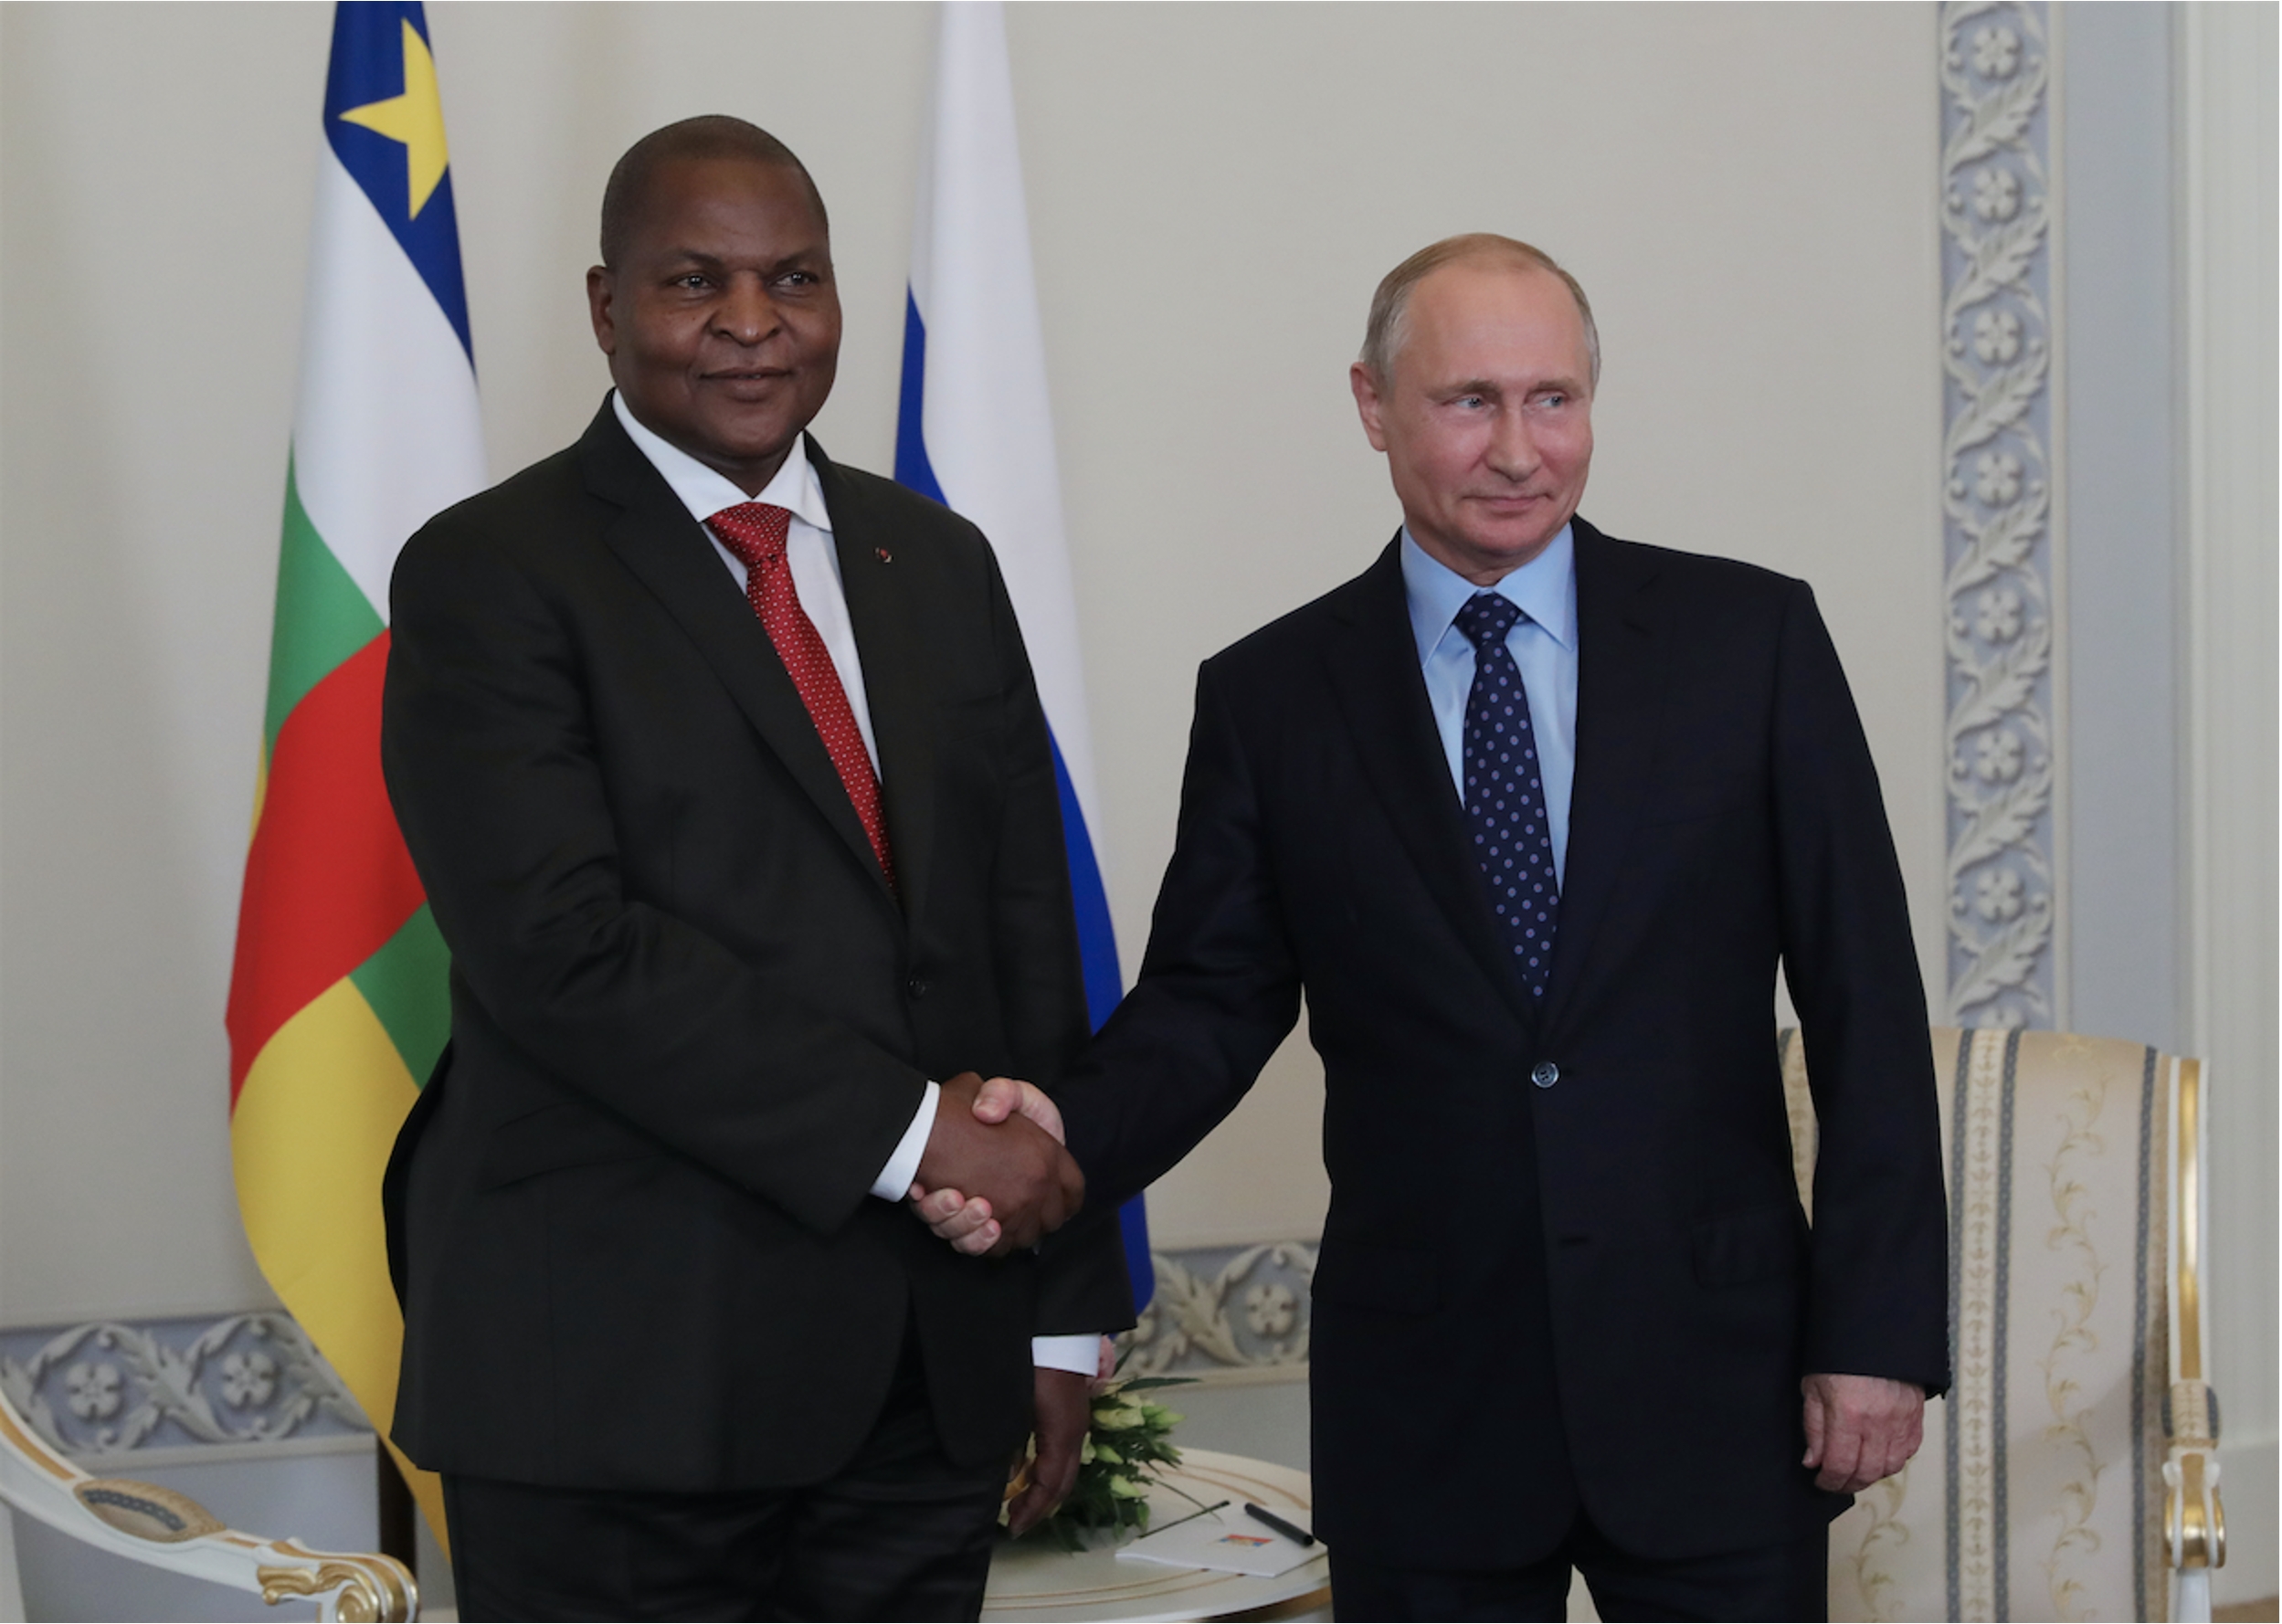 The fruits of cooperation between Russia and Central African Republic